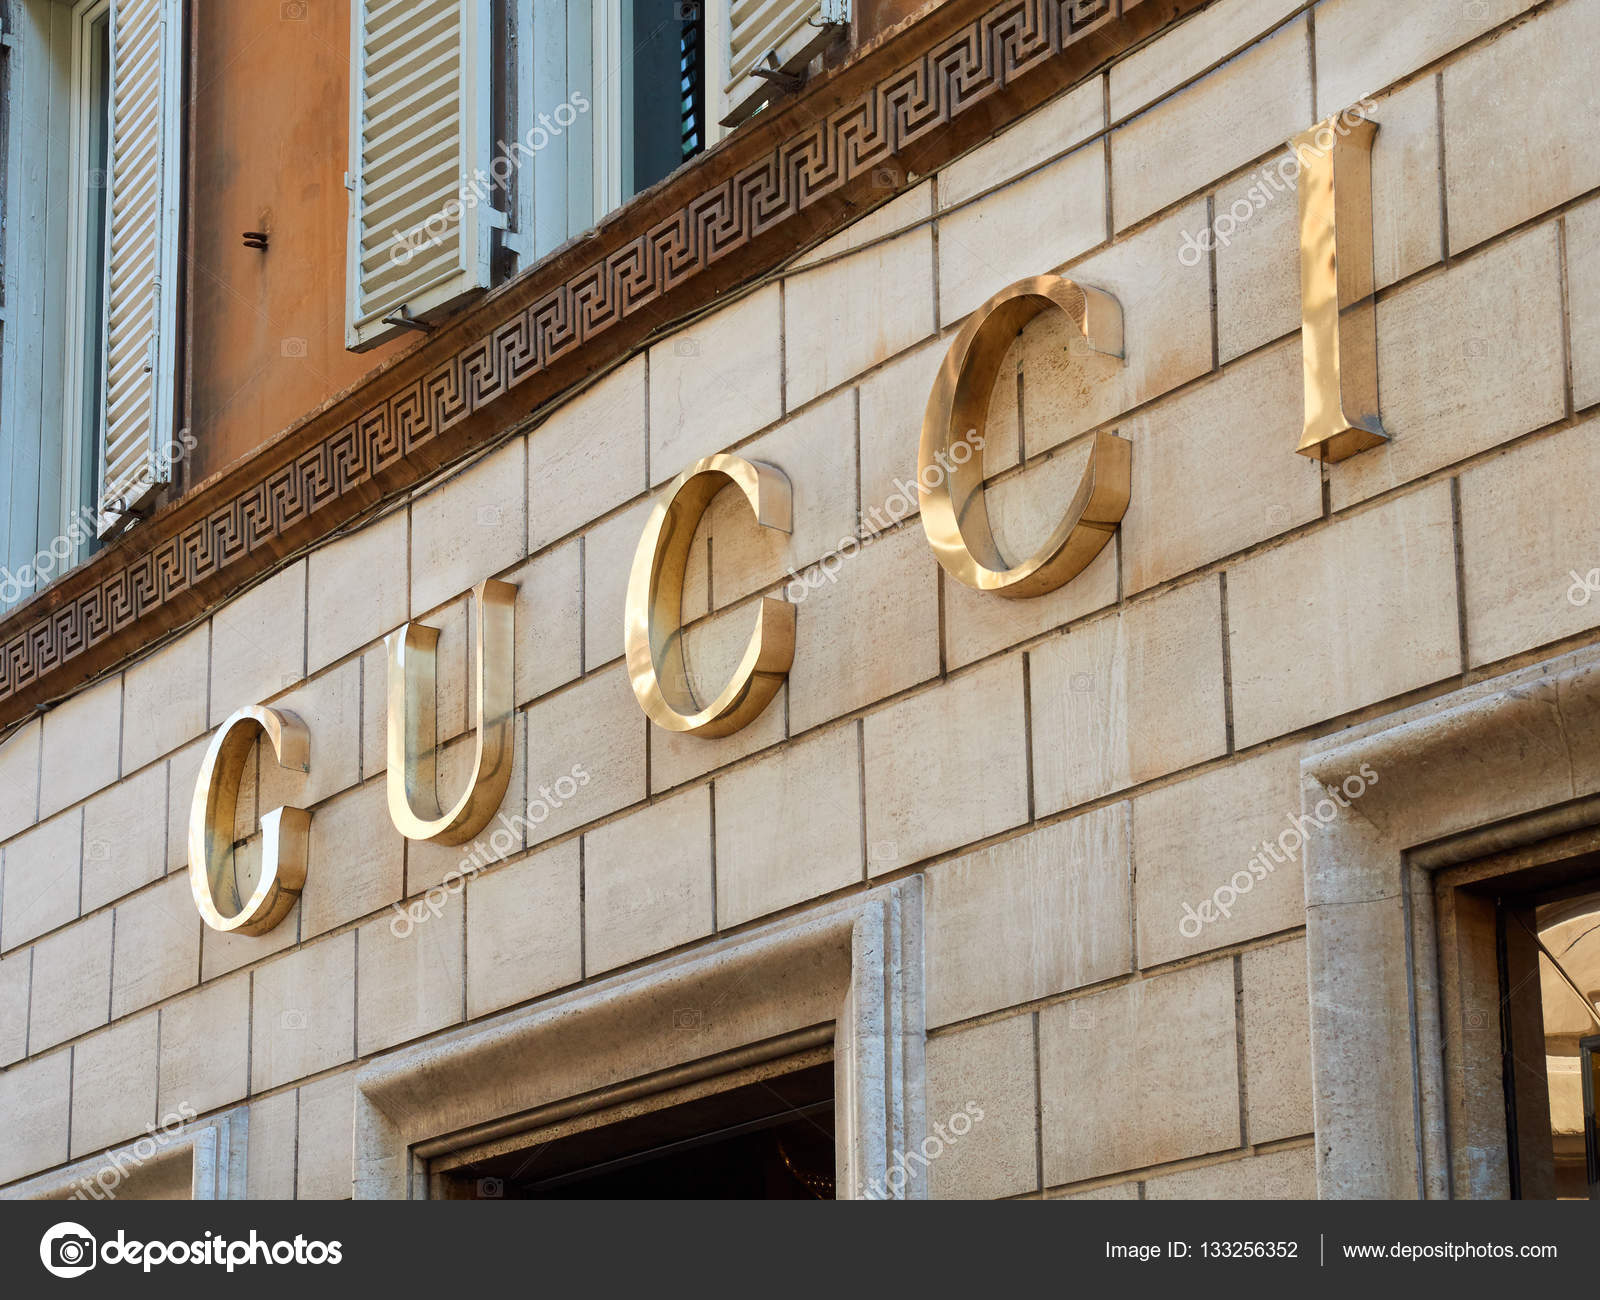 gucci store downtown